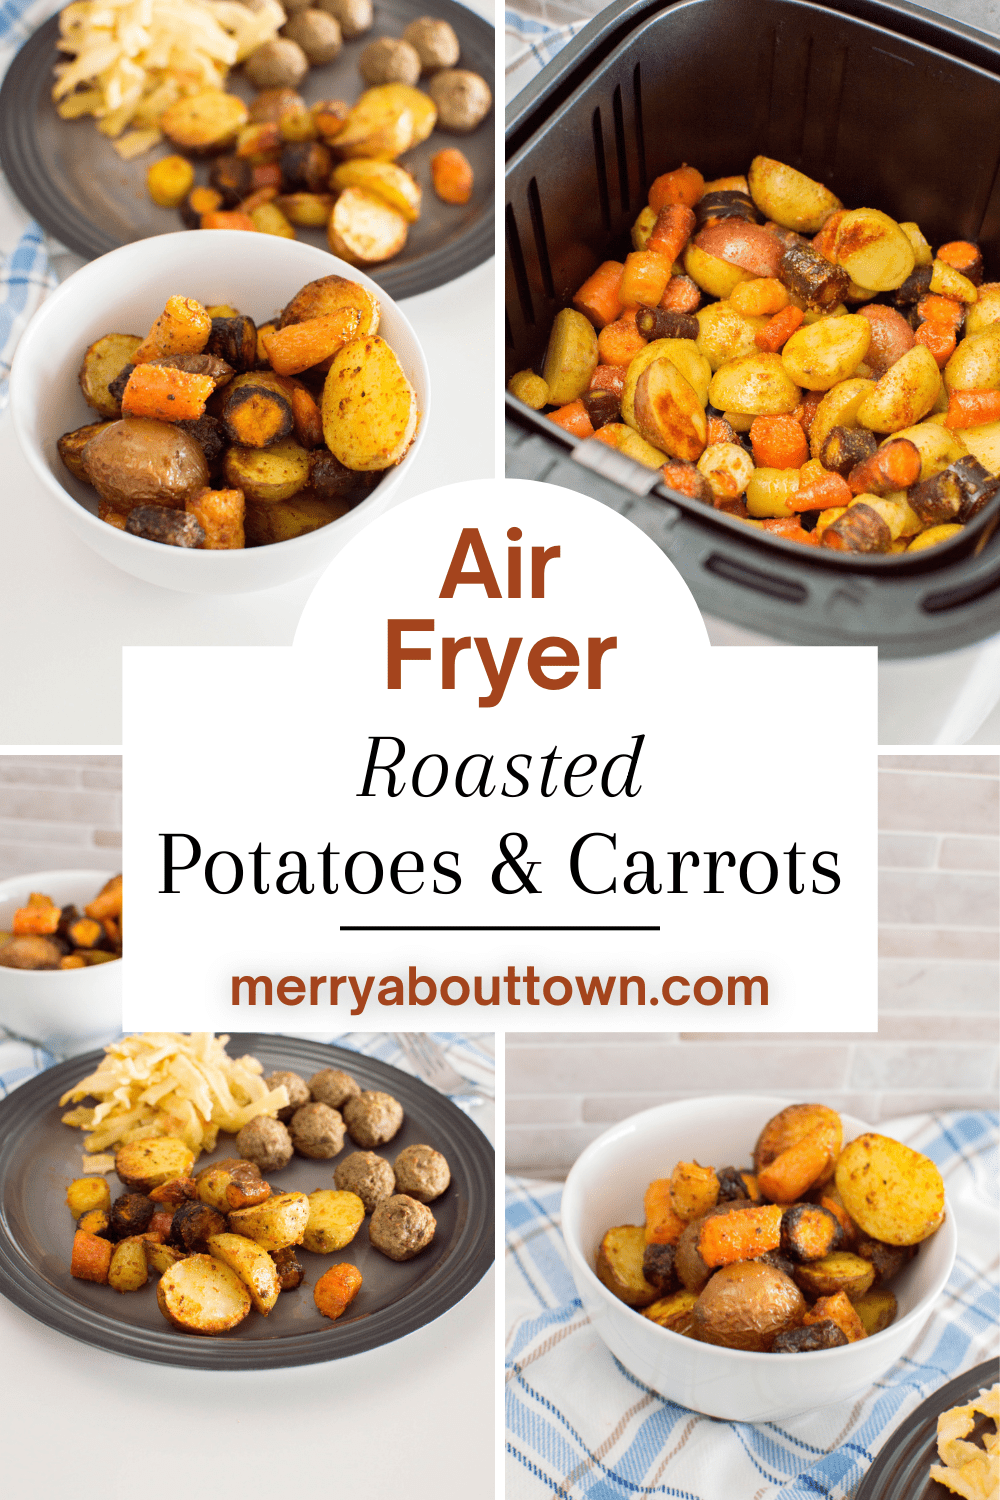 This simple recipe for air fryer potatoes and carrots makes for the perfect side dish! It’s easy to prepare and requires very little clean-up, making it ideal for busy weeknights.